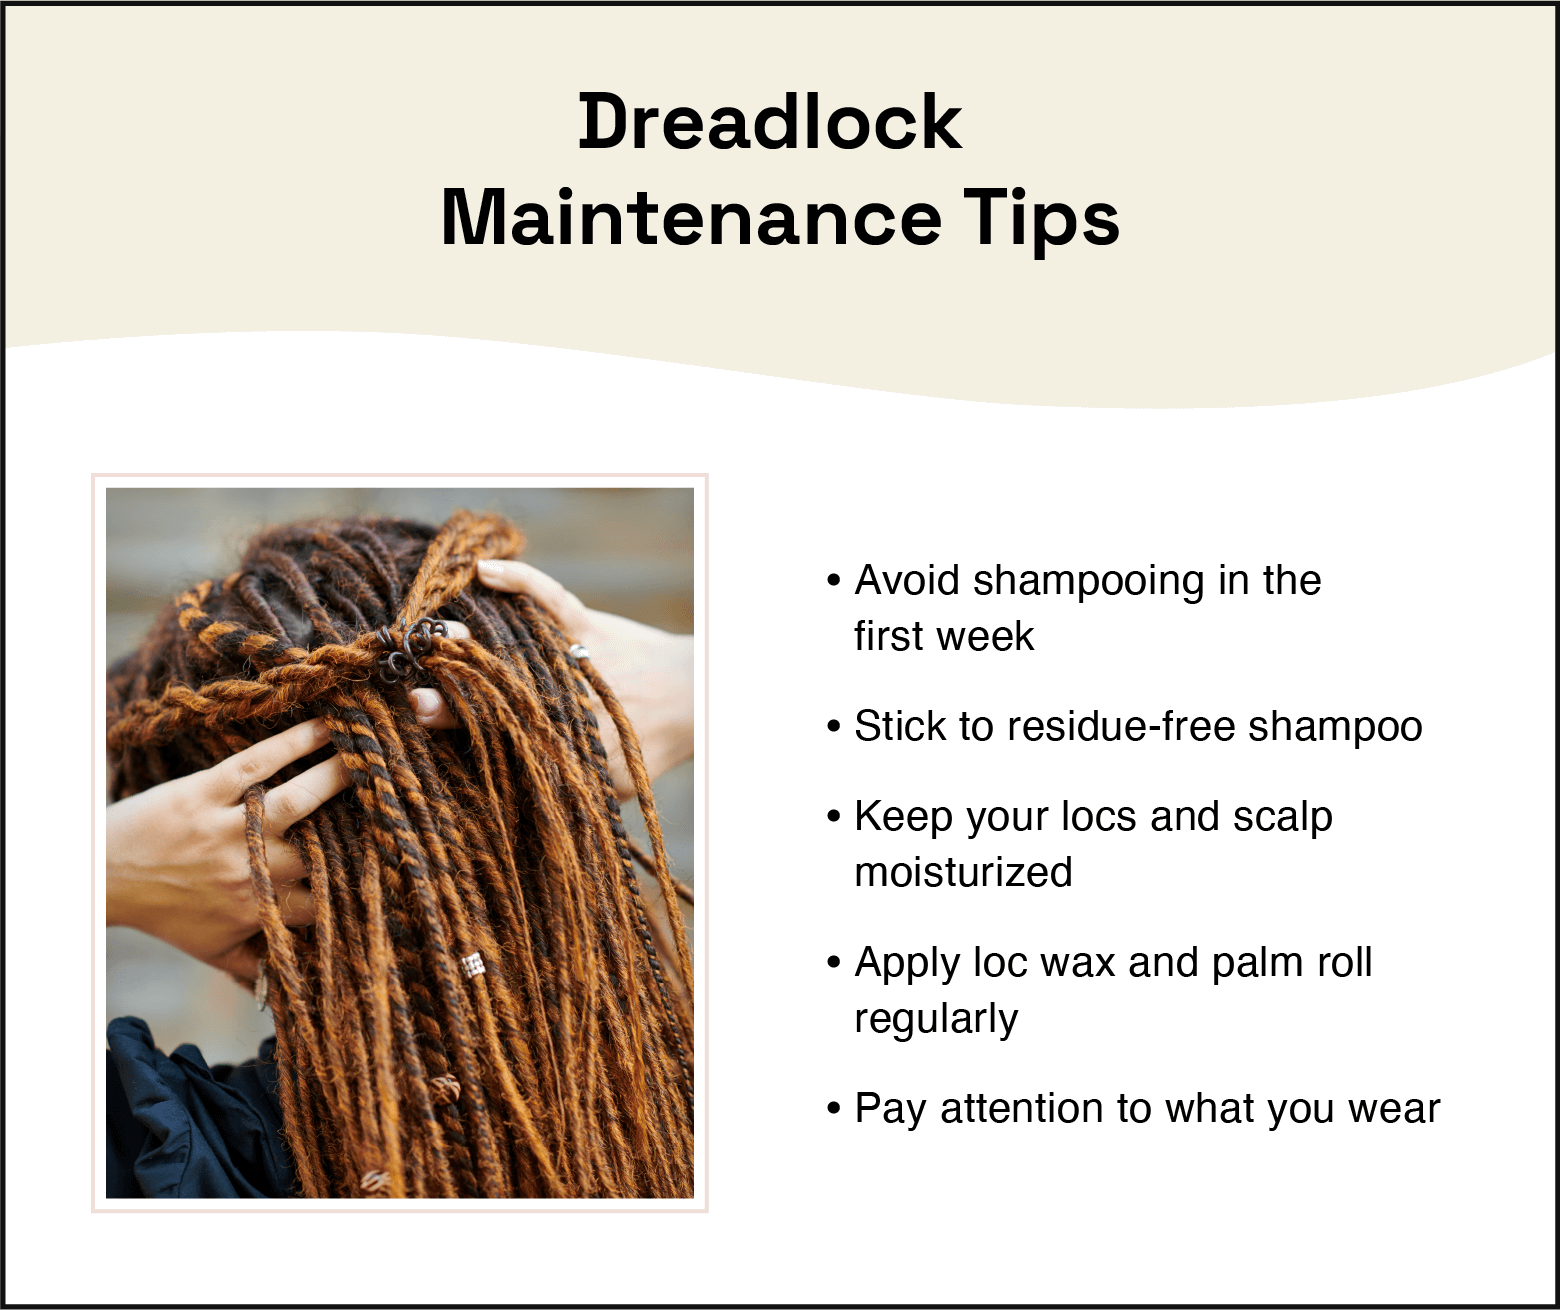 What Are Dreadlocks? How To Make Dreadlocks, Maintenance, And Tips  